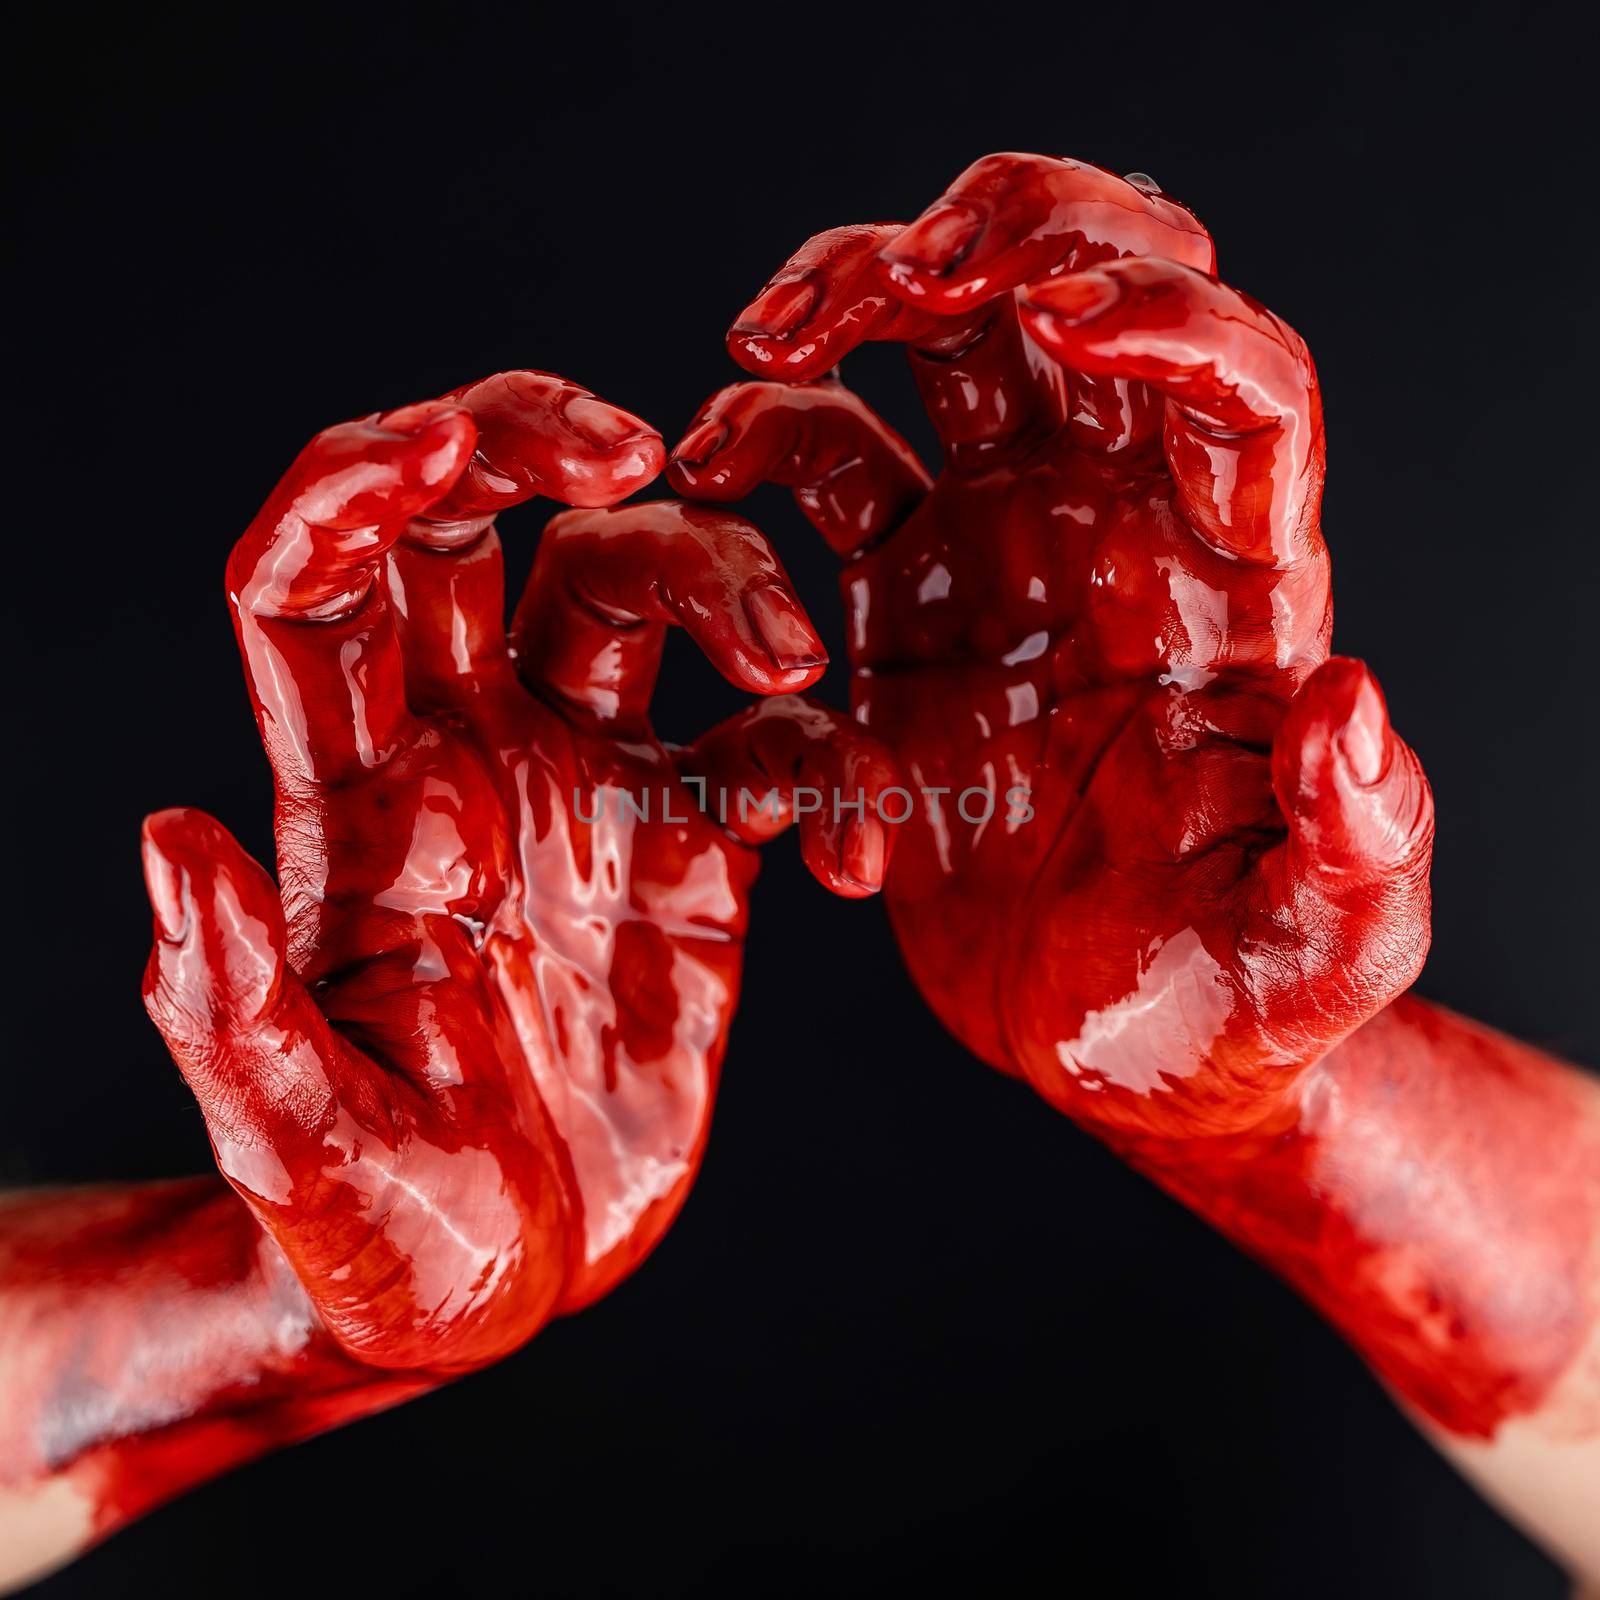 Women's hands in blood on a black background. by mrwed54